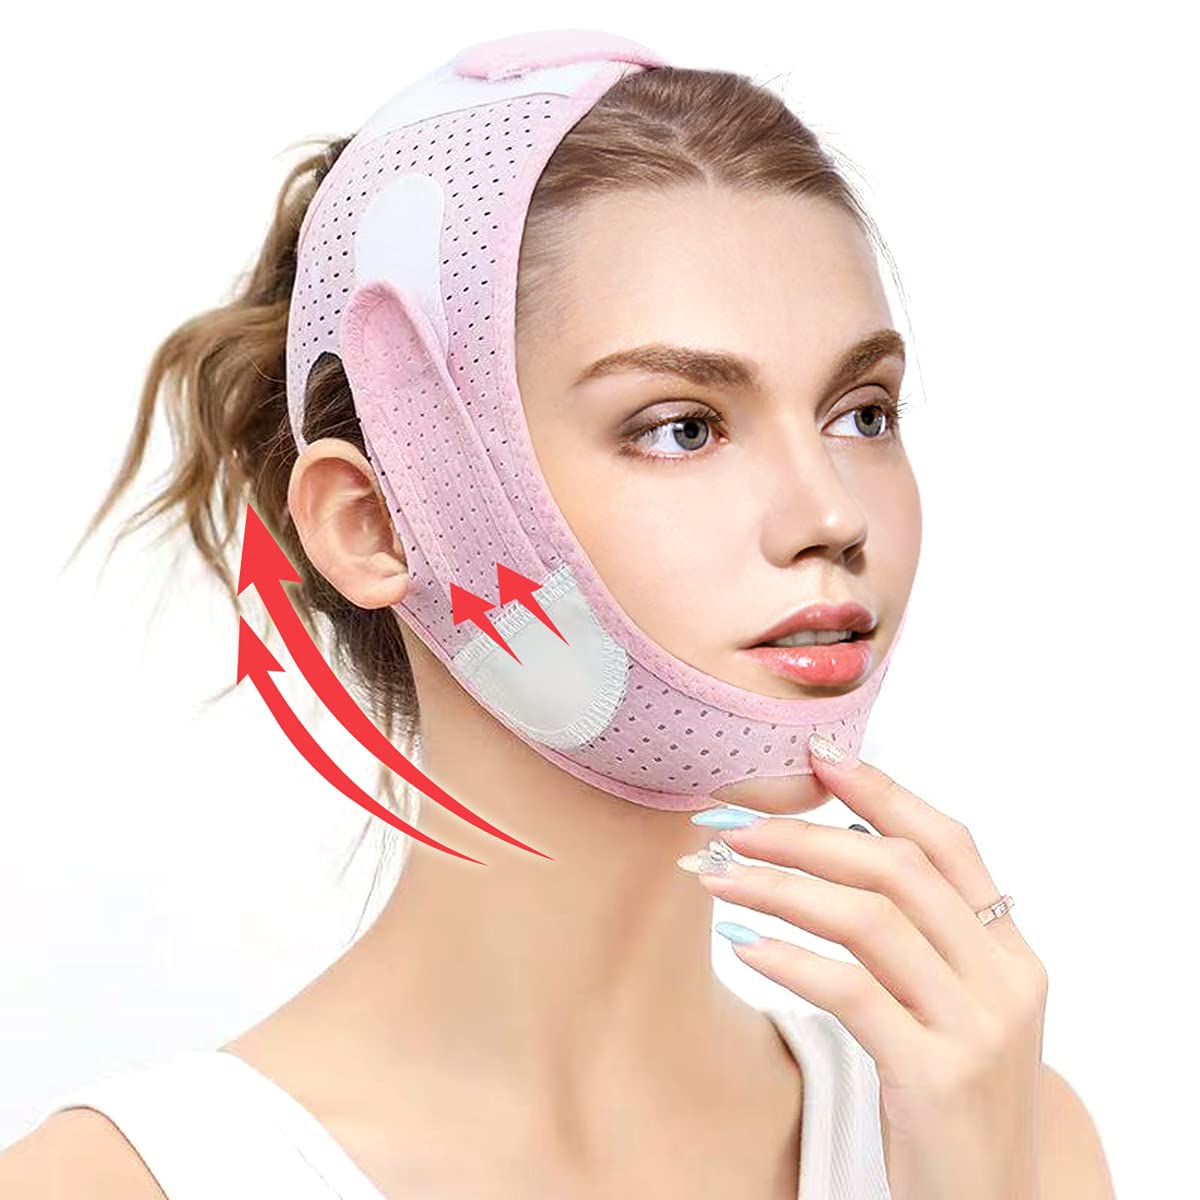 V Line Shaping Face Masks Double Chin Reducer Strap Anti-Wrinkle